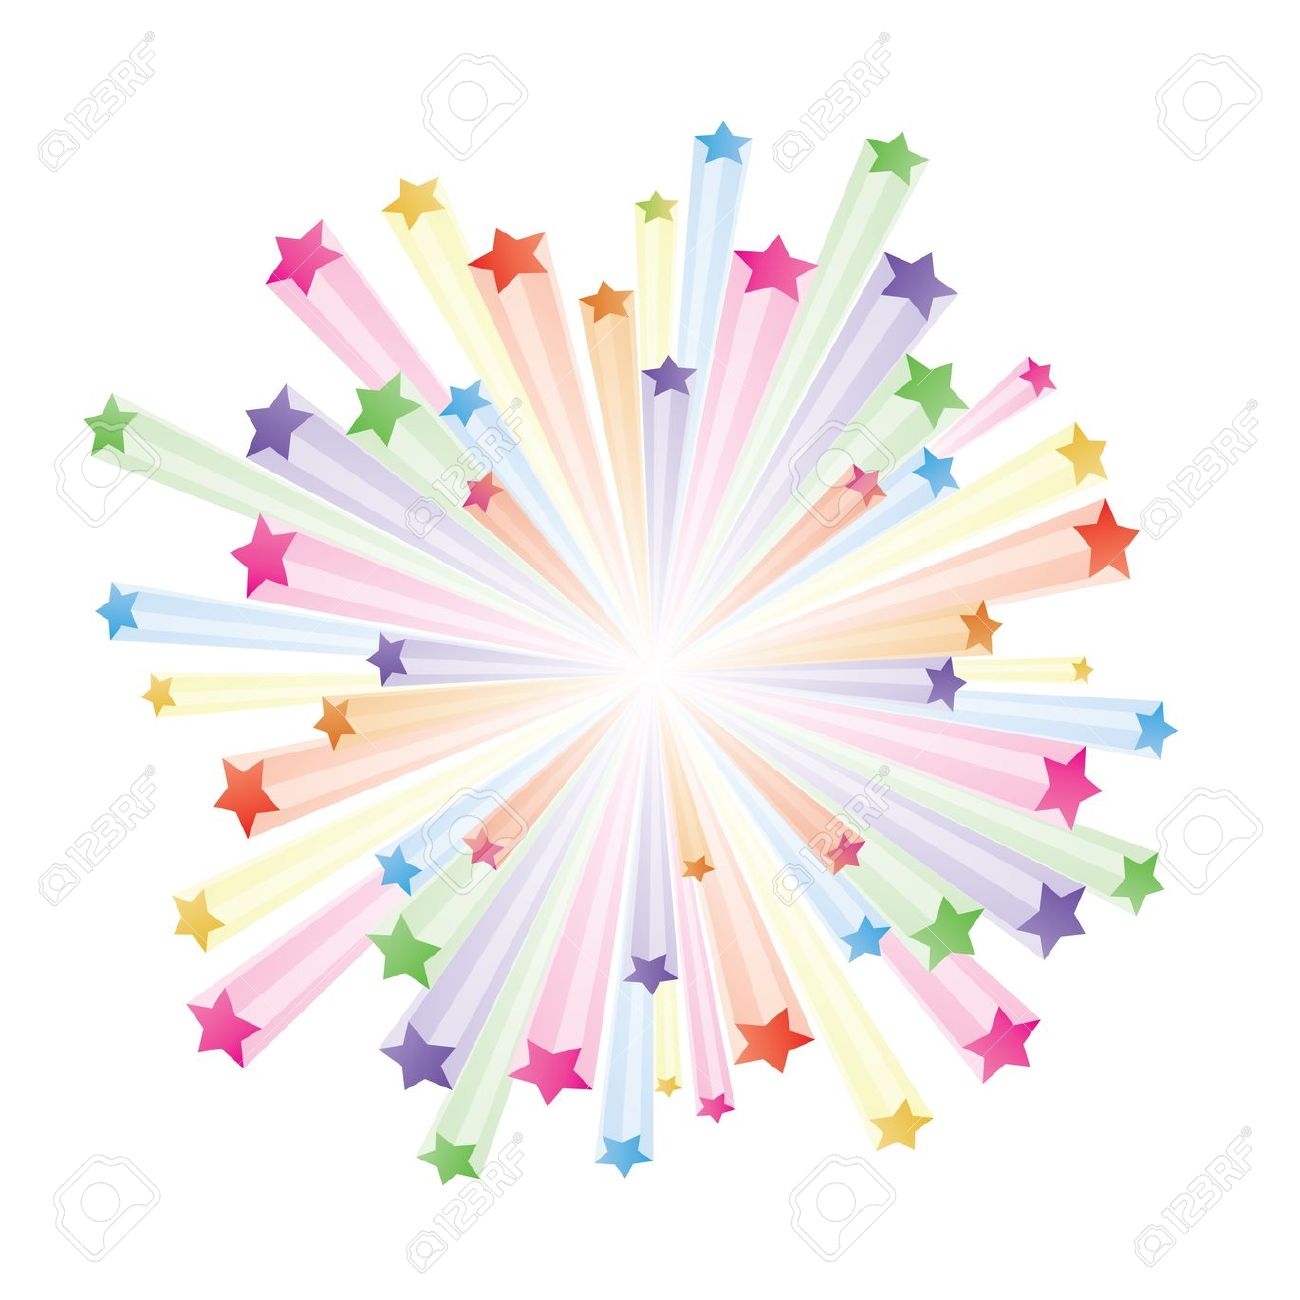 Explosion exploding star clipart 2